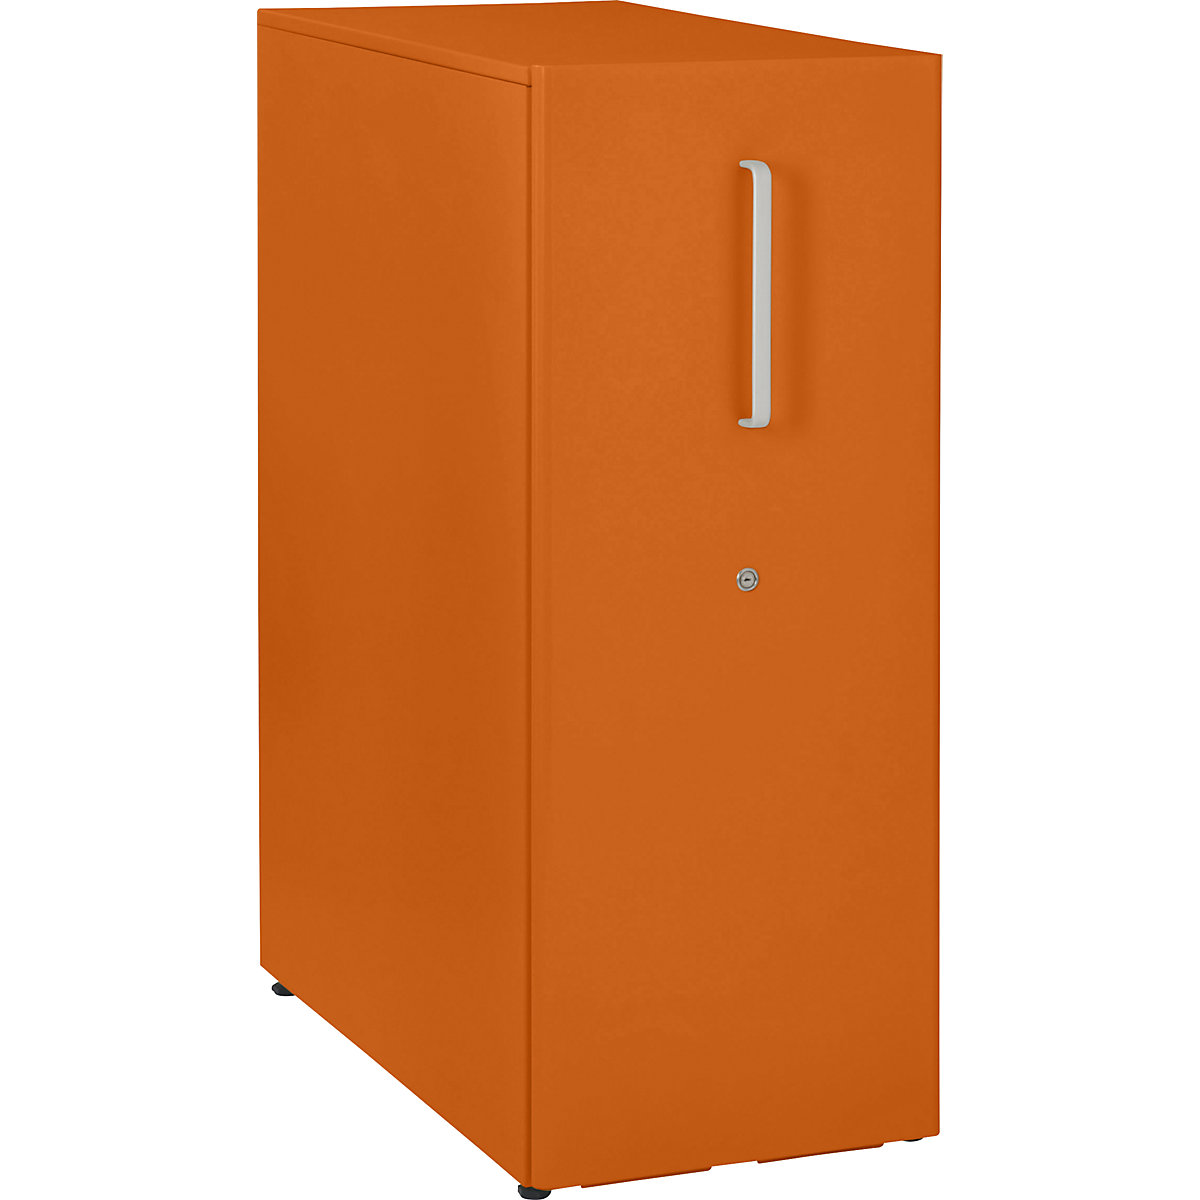 Tower™ 3 add-on furniture, with worktop, 1 pin board – BISLEY, for the left side, 1 shelf, orange-16